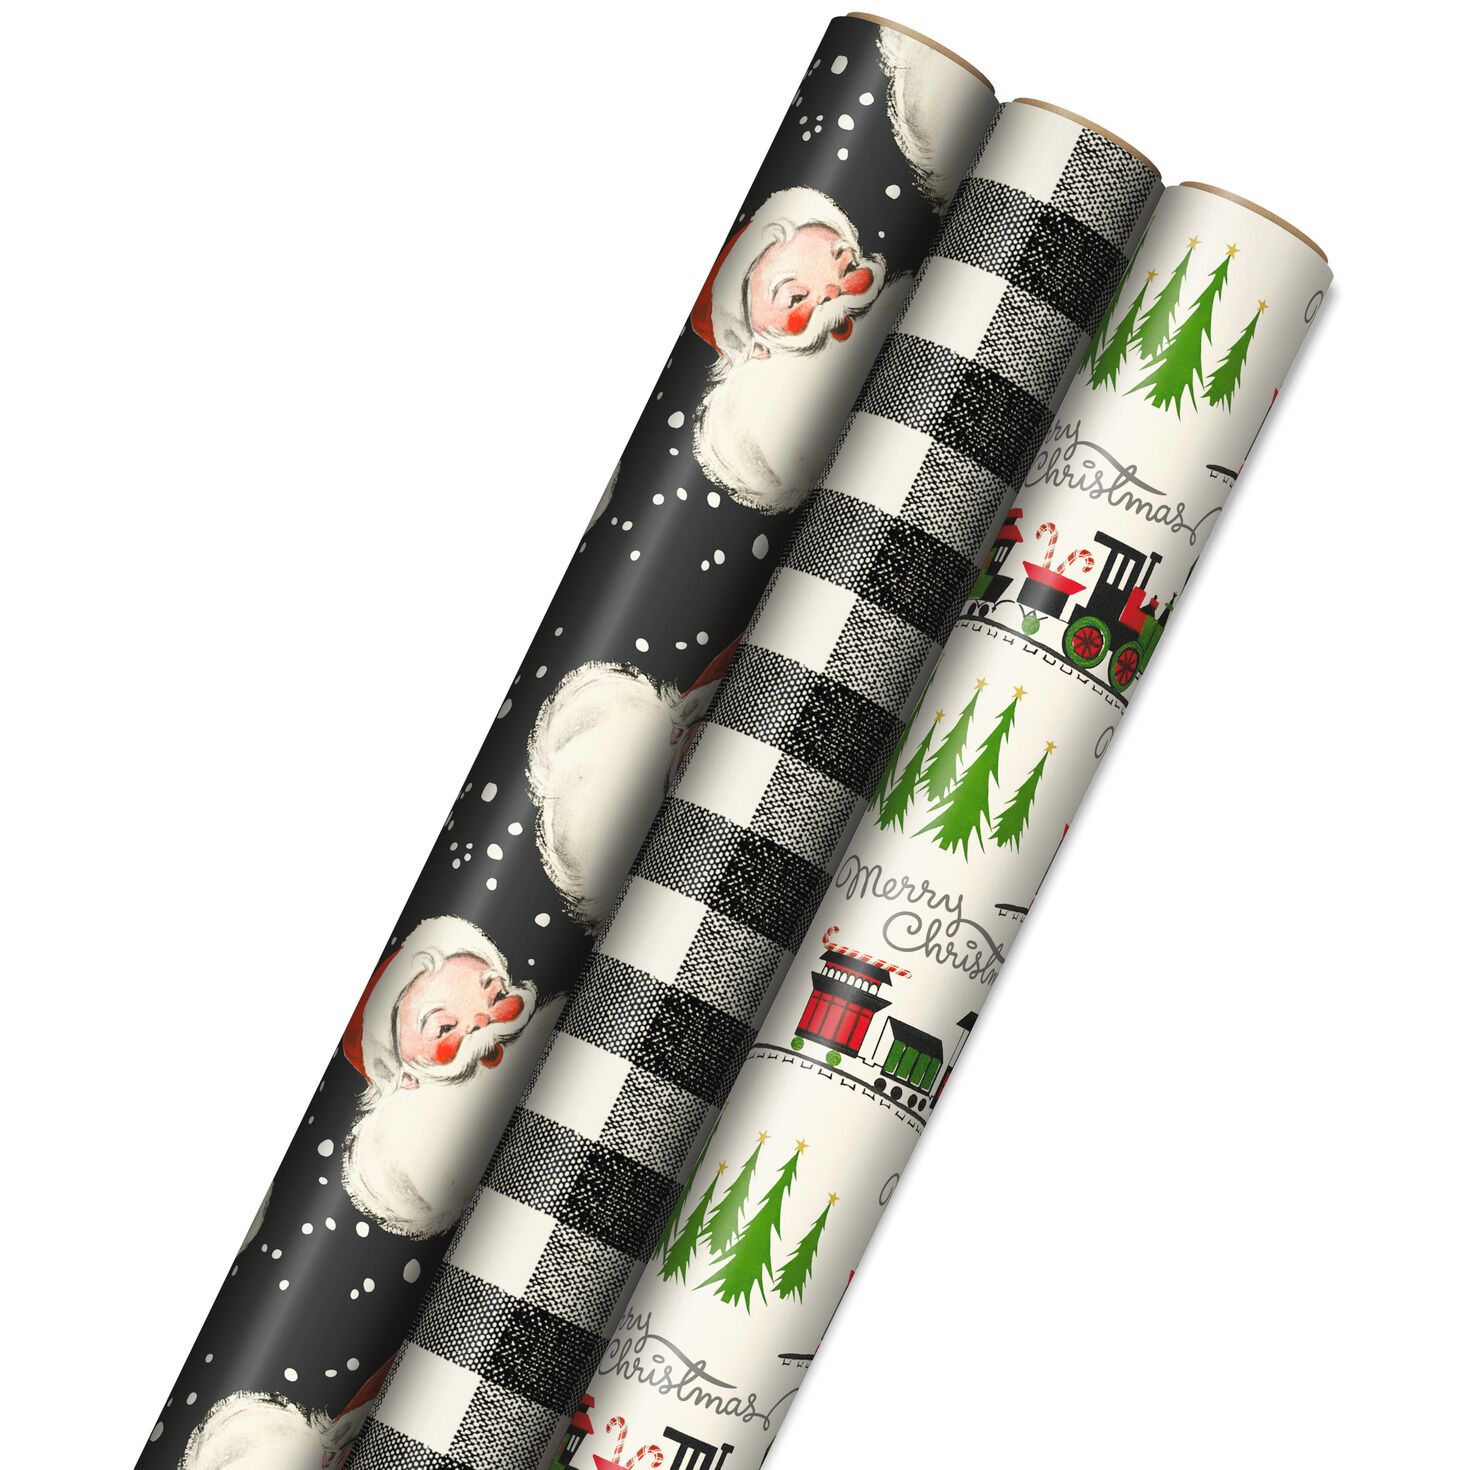 Holiday Time Premium Scented Gift Wrapping Paper, 3 Rolls, Peppermint,  Gingerbread, and Christmas Tree Scented Gift Wrapping Paper